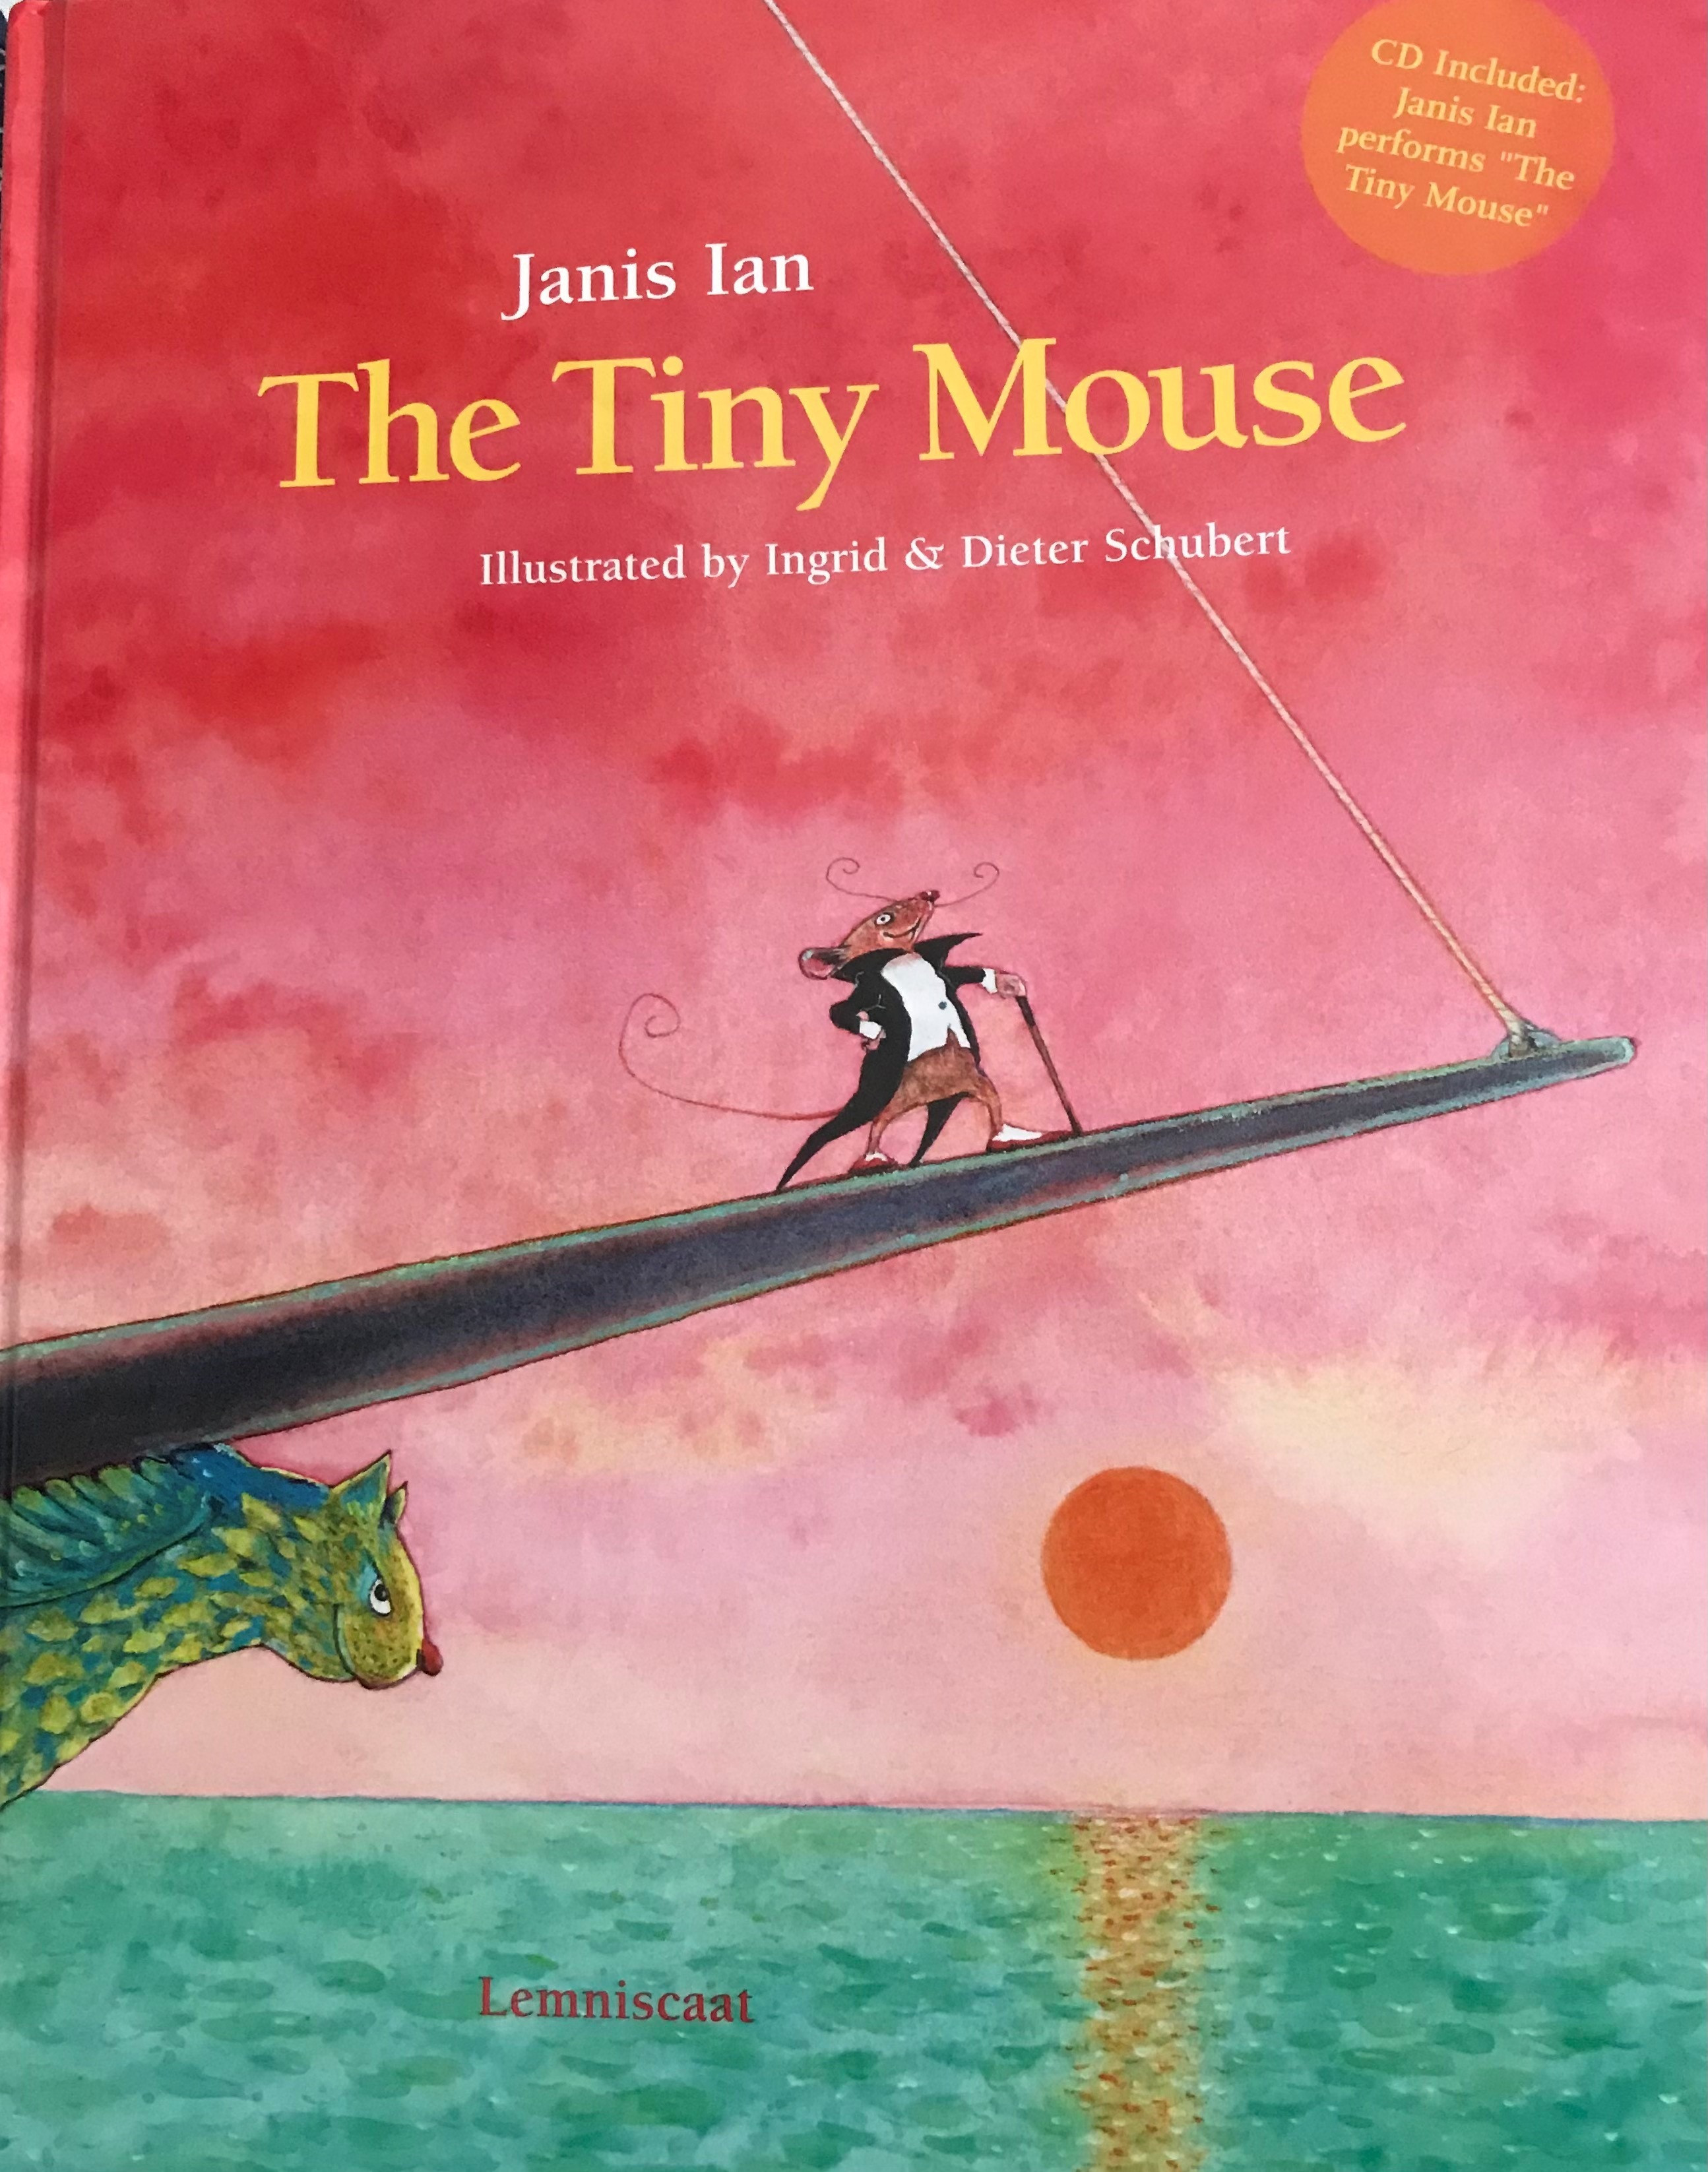 The Tiny Mouse -  autographed children's book by Janis Ian - includes a CD of a song by Janis Ian